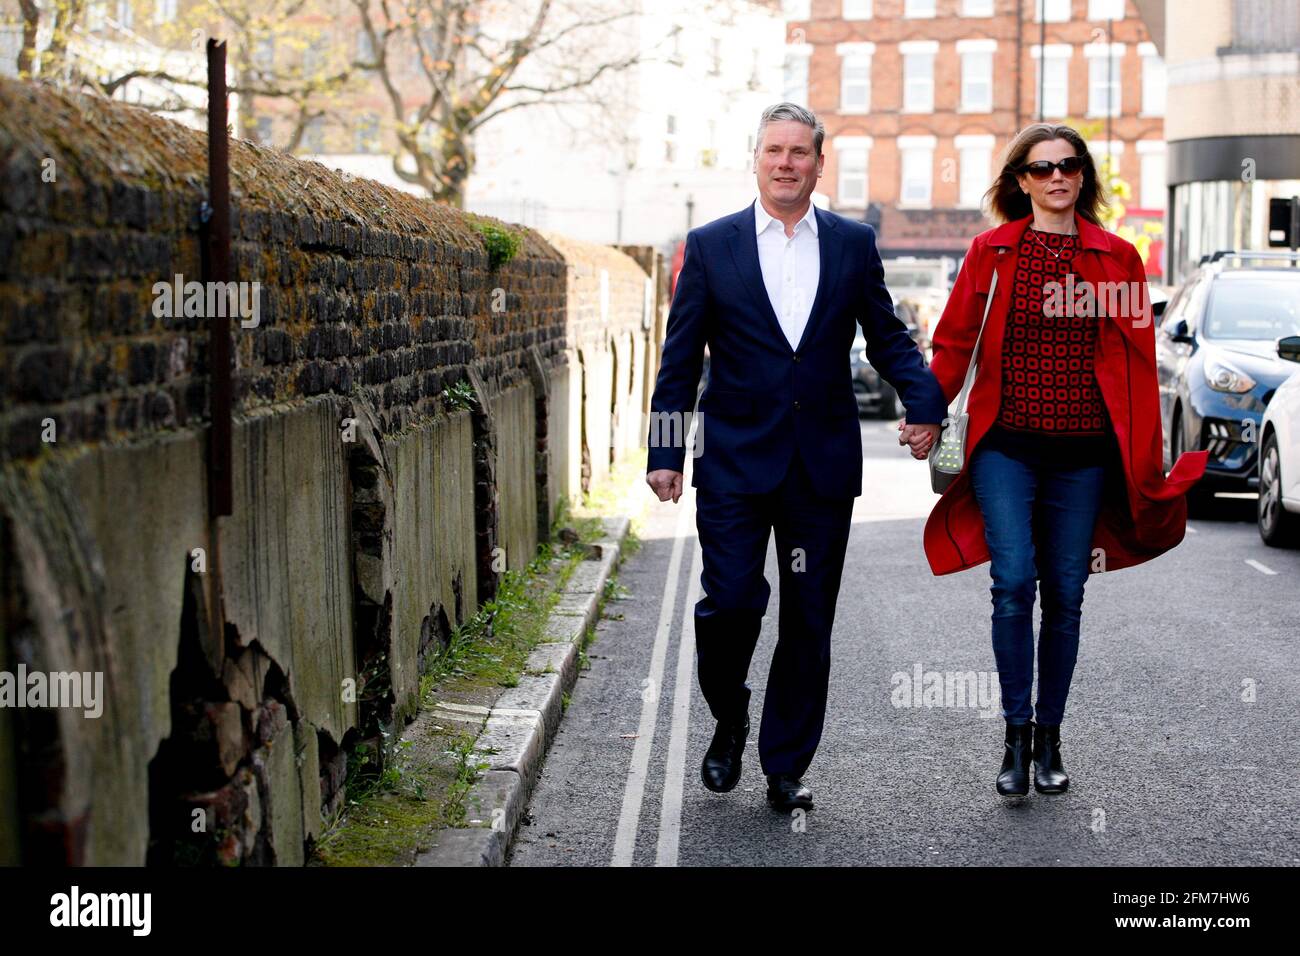 LONDON, May 7, 2021 Britain's Labour Party leader Keir Starmer and his wife Victoria Starmer walk to a polling station to vote in local elections in London, Britain, on May 6, 2021. Millions of voters in Britain are going to polling stations for local elections in what political commentators have dubbed as the Super Thursday, which is seen as a major test for Britain's main political party leaders. Credit: Xinhua/Alamy Live News Stock Photo